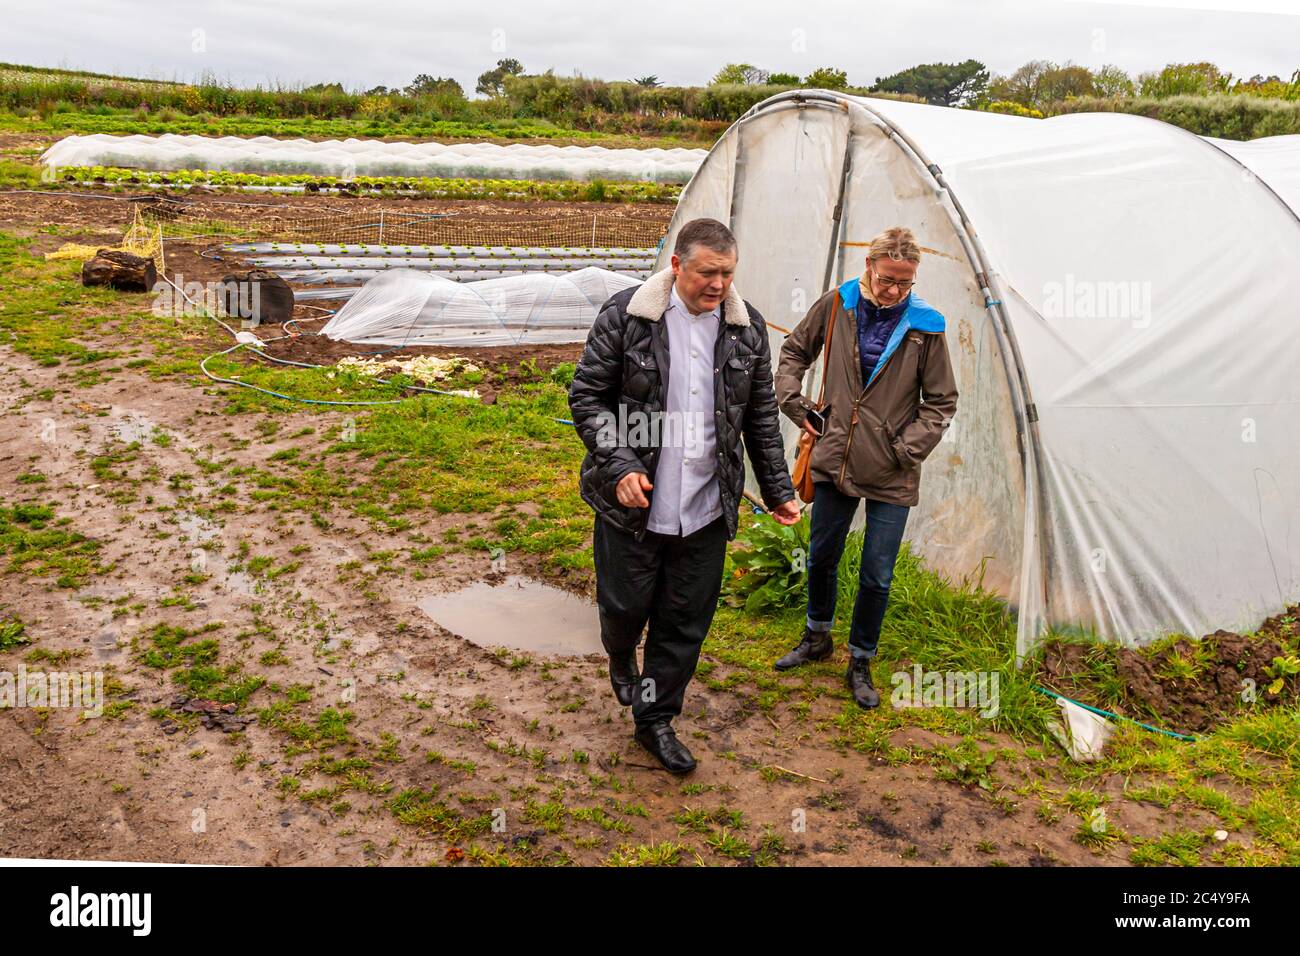 Puddles are no obstacle between the delicacies that grow in the greenhouses of Brittany. Food Tour with Michelin Star Chef Loic Le Bail in Morlaix, France Stock Photo